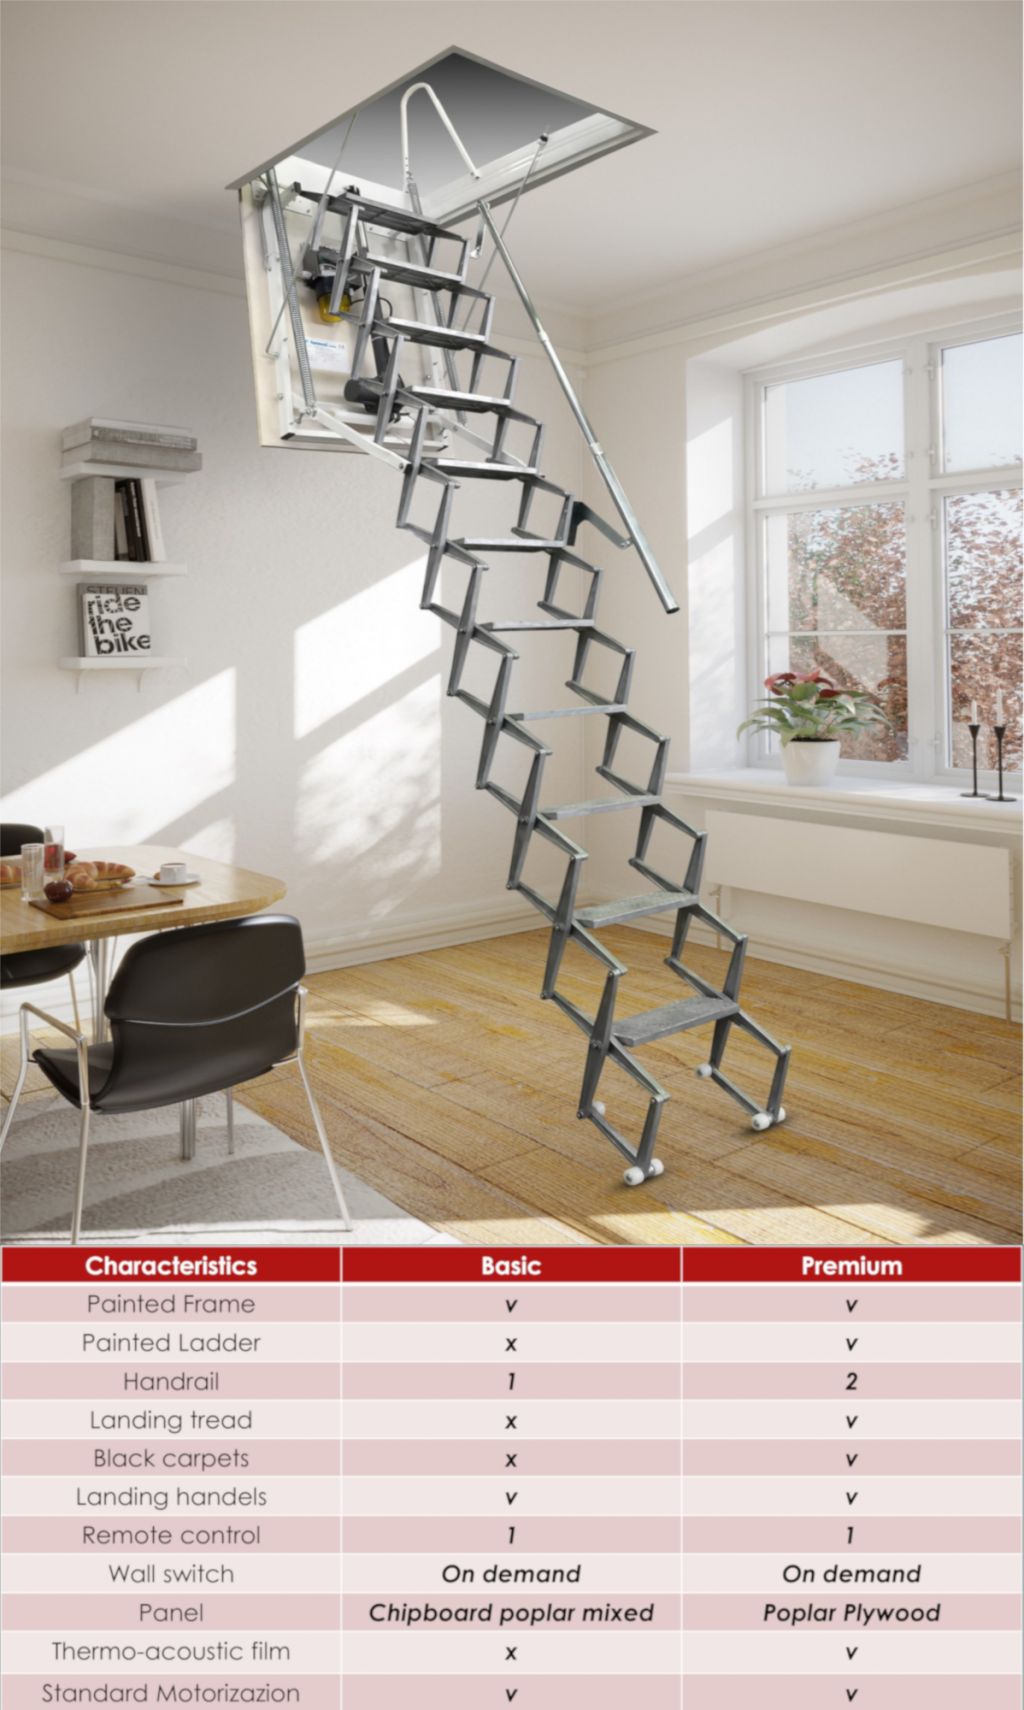 Auto Electric Attic Stairs - Basic